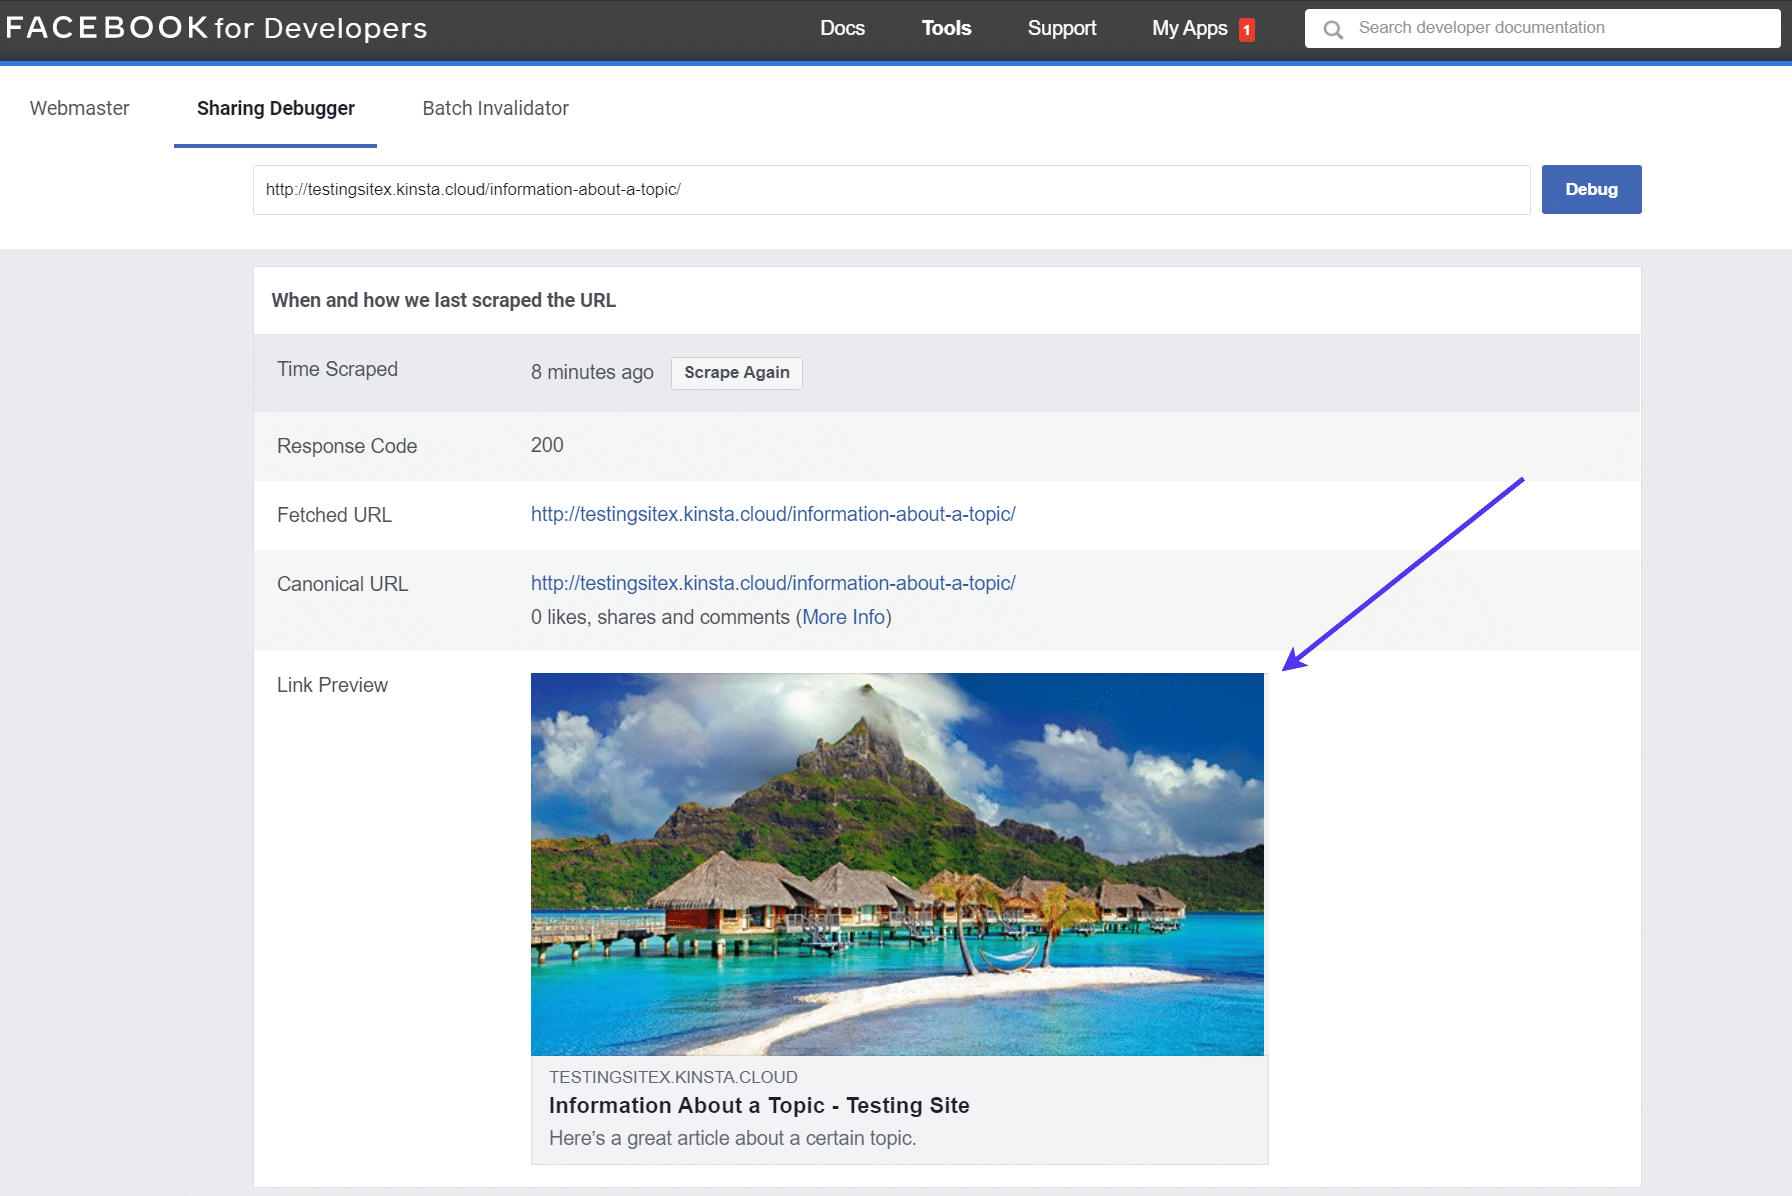 Checking the 'Link Preview' of a URL on Facebook